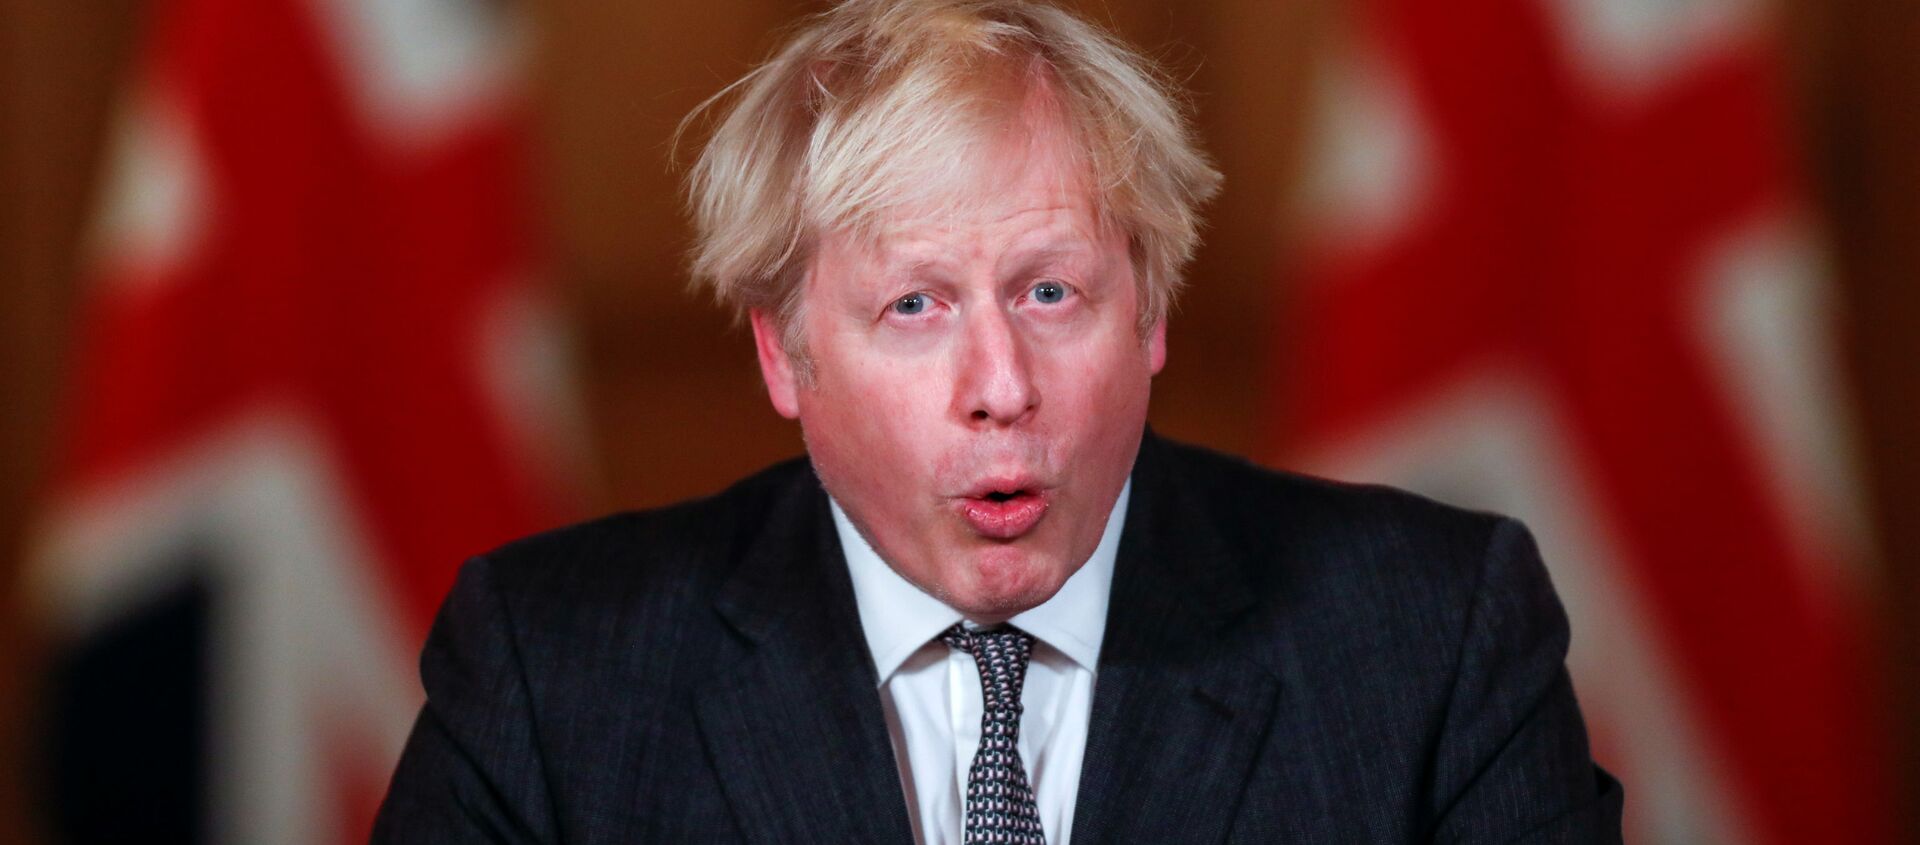 Britain's Prime Minister Boris Johnson speaks during a news conference announcing tightening of COVID-19 tiers, at Downing Street in London, Britain December 30, 2020.  - Sputnik International, 1920, 28.01.2021